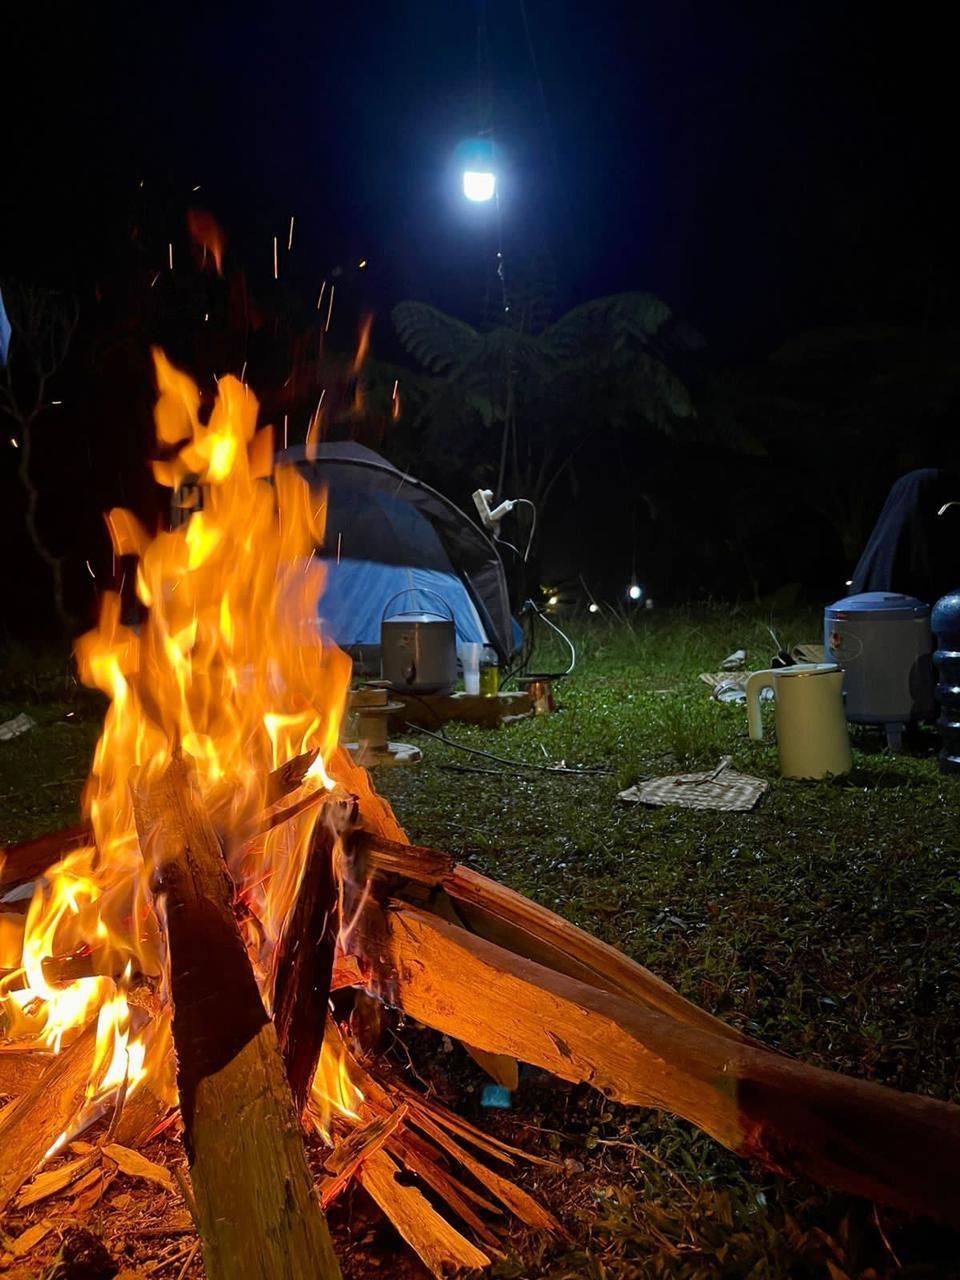 night, flame, fire, burning, campfire, bonfire, heat, nature, camping, glowing, wood, no people, outdoors, moon, plant, grass, illuminated